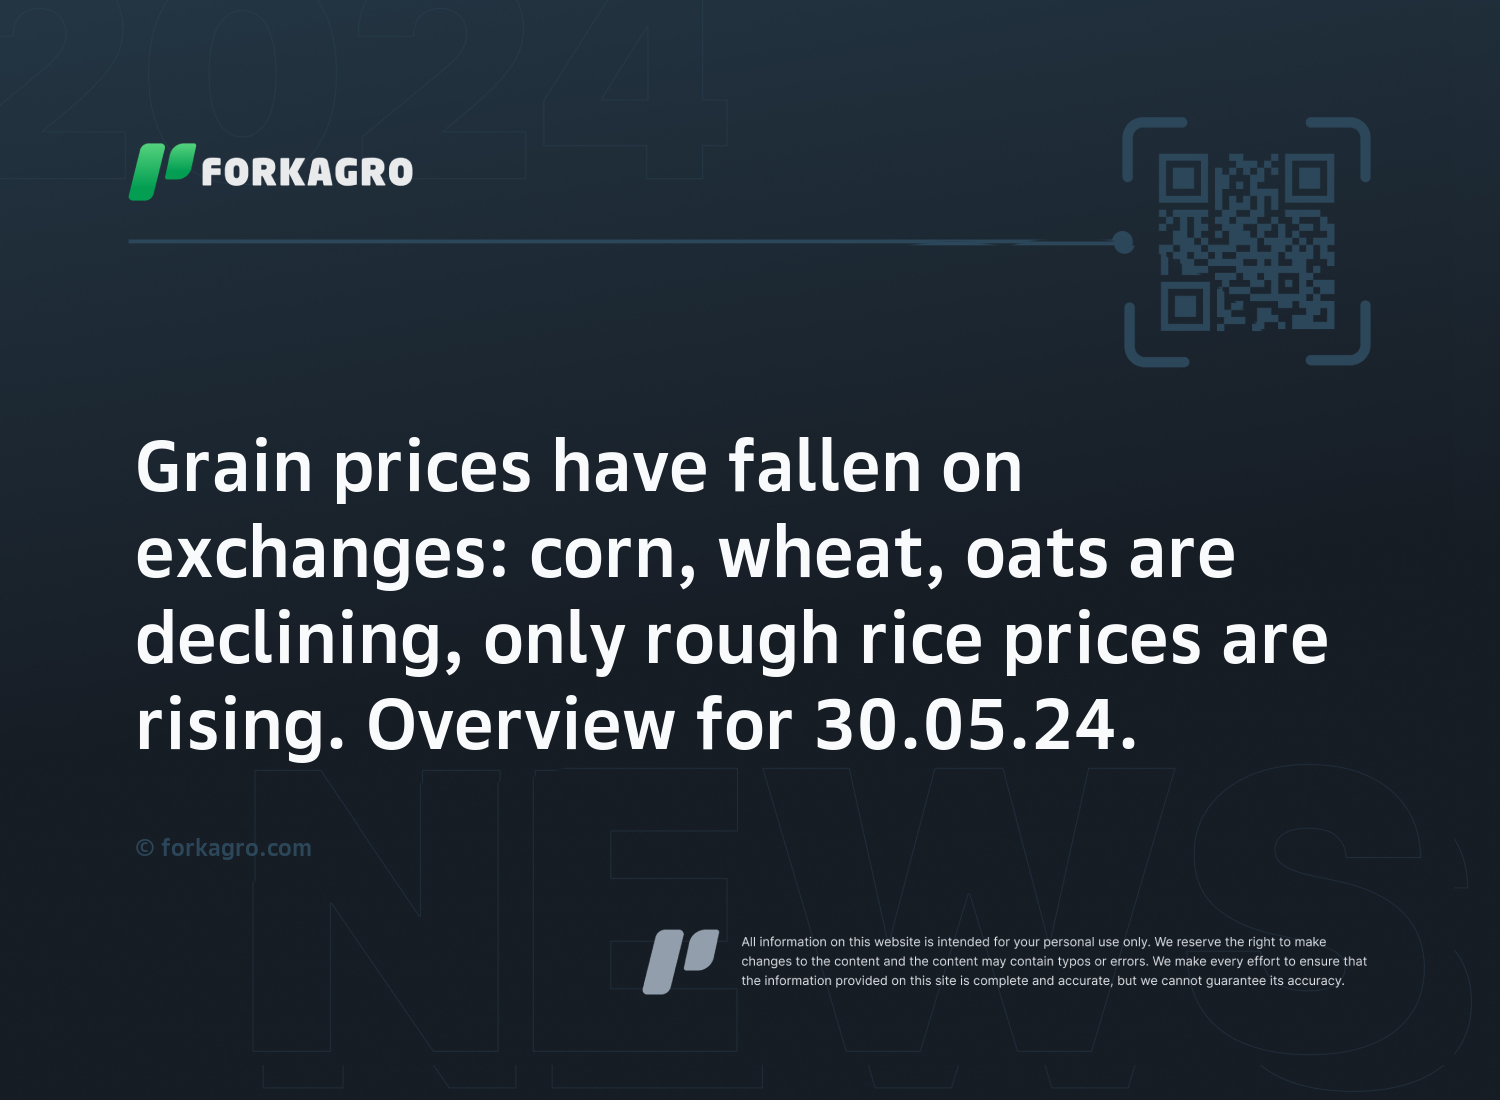 Grain prices have fallen on exchanges: corn, wheat, oats are declining, only rough rice prices are rising. Overview for 30.05.24.